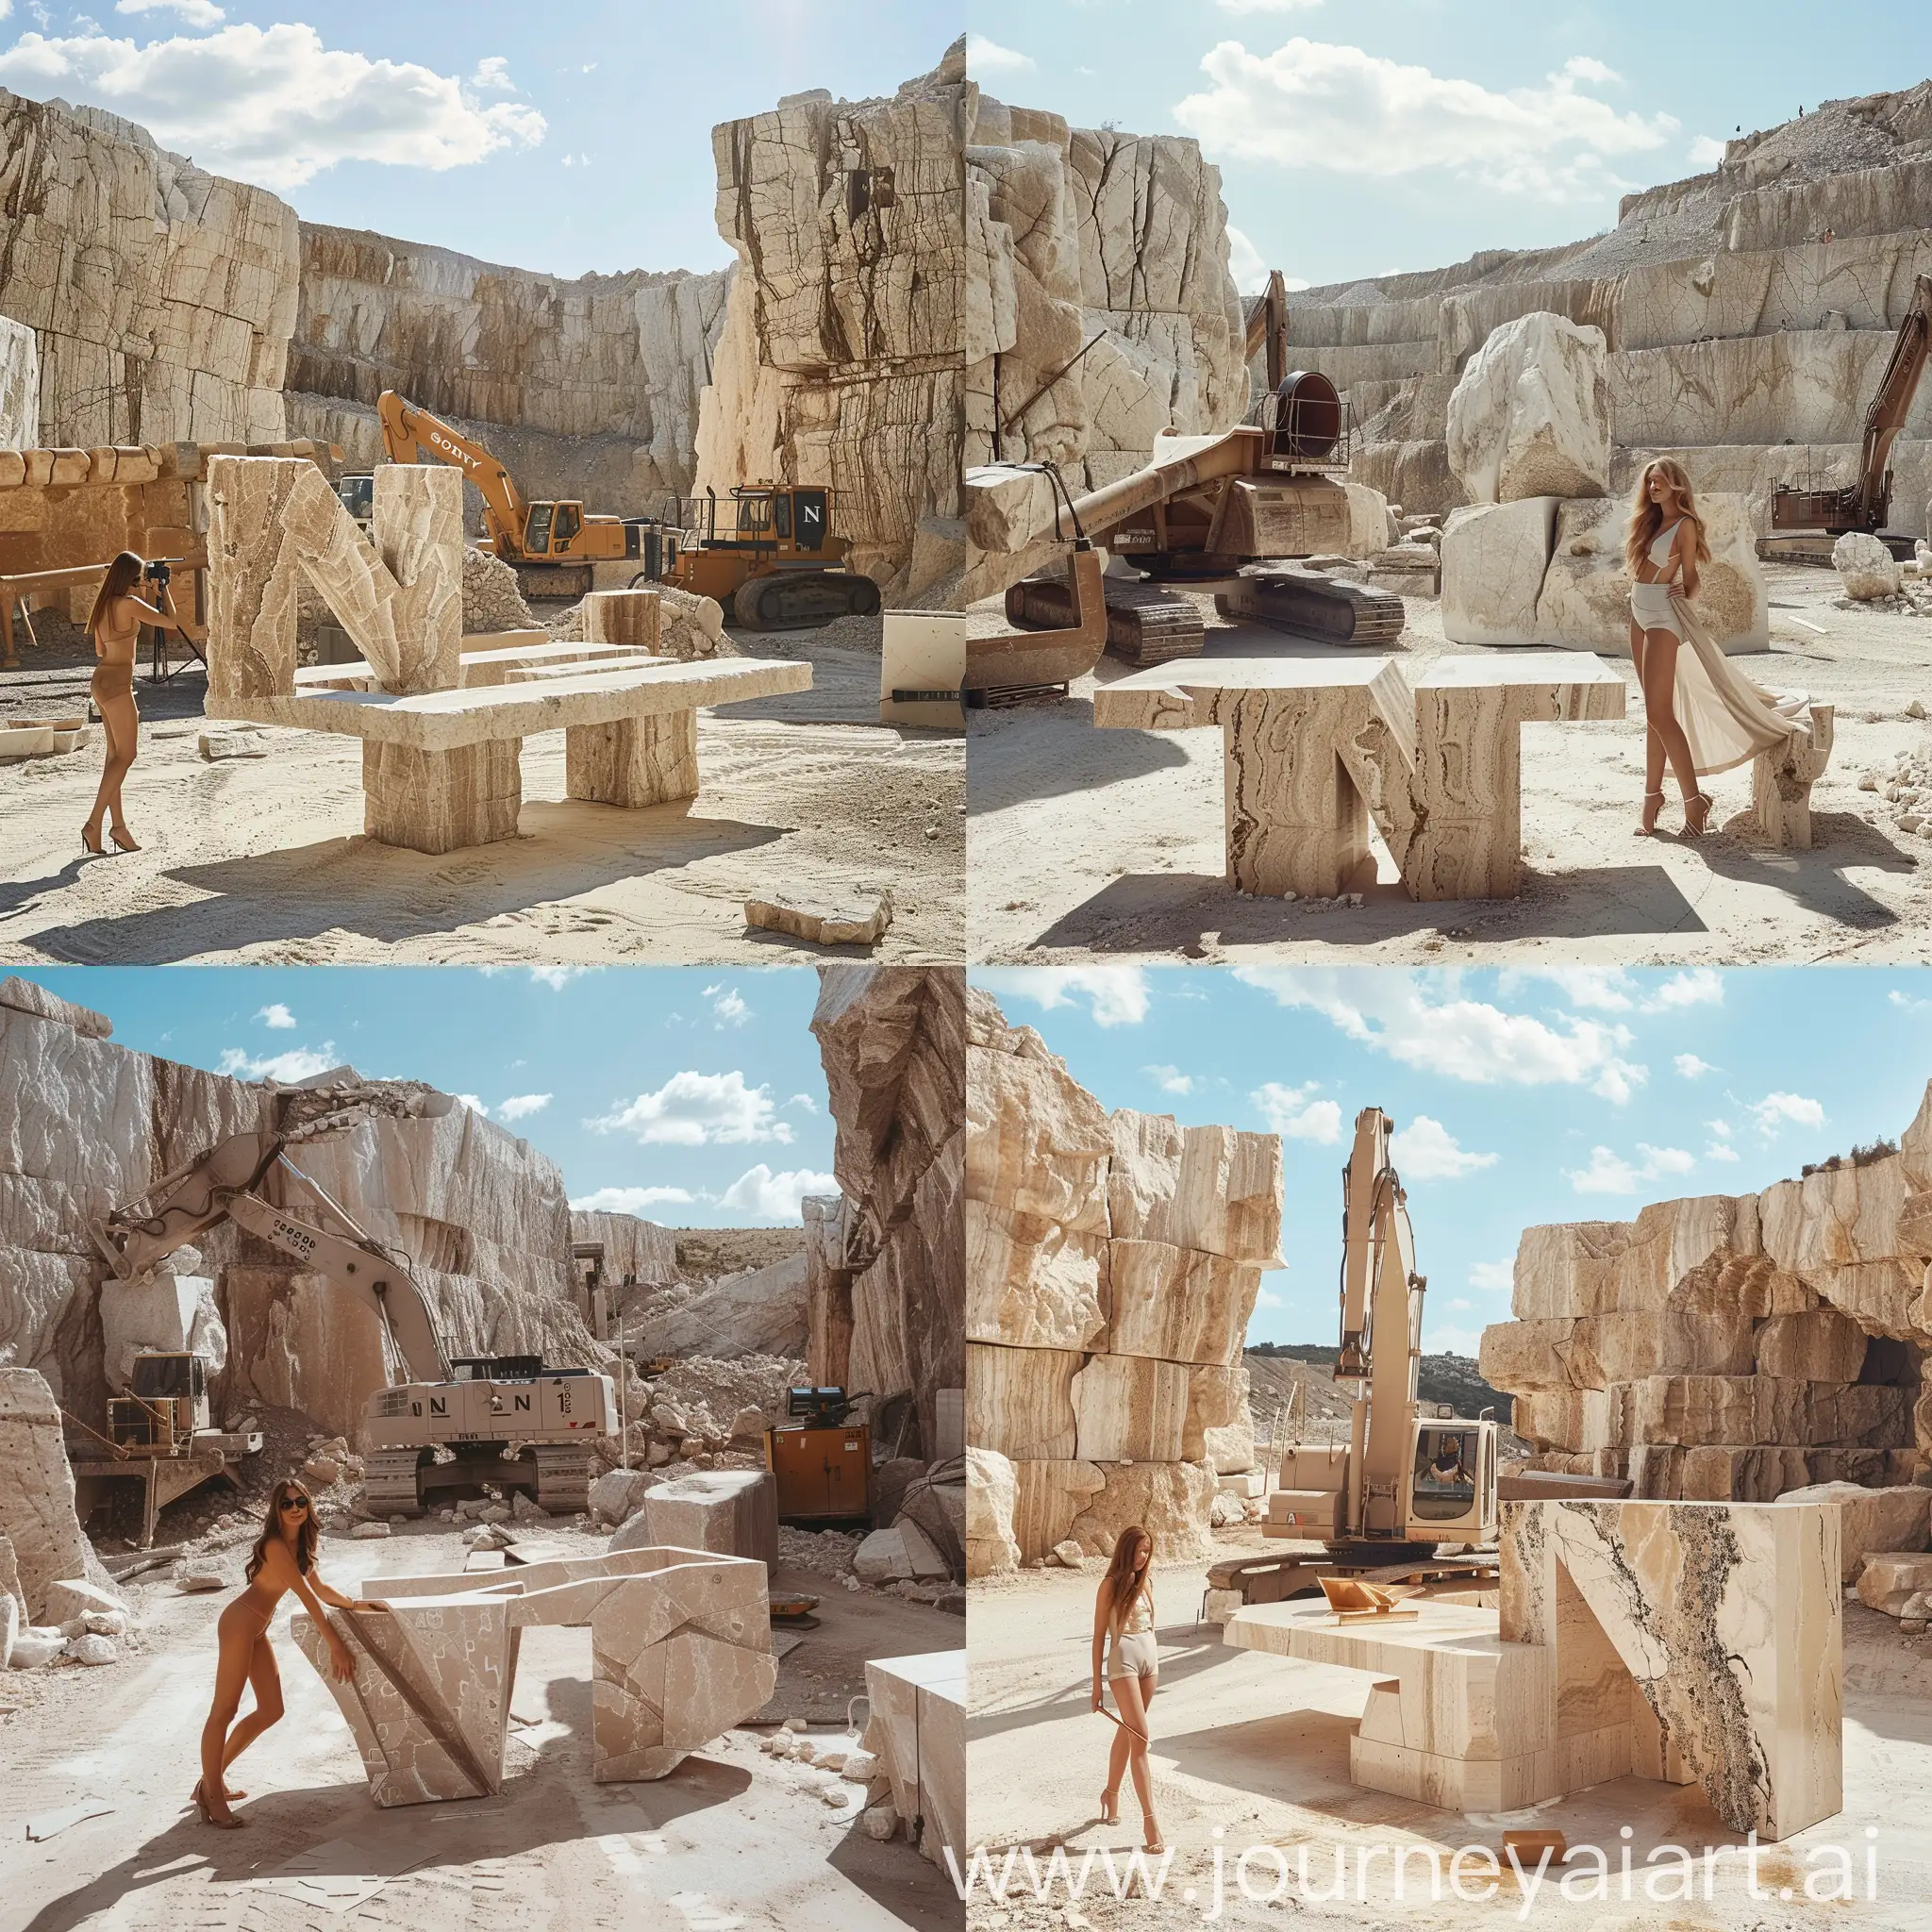 In a travertine stone quarry, under a sunny sky, amidst the hustle of heavy machinery and massive travertine stone walls, there is a photo shoot setup around a sophisticated travertine table. The professional production team is using high-end full-frame cameras like the Sony Alpha A1 to capture the scene. In the foreground, a female model tries to pose next to the table, while a large travertine block shaped into the letter 'N' adds a decorative touch to the setting.